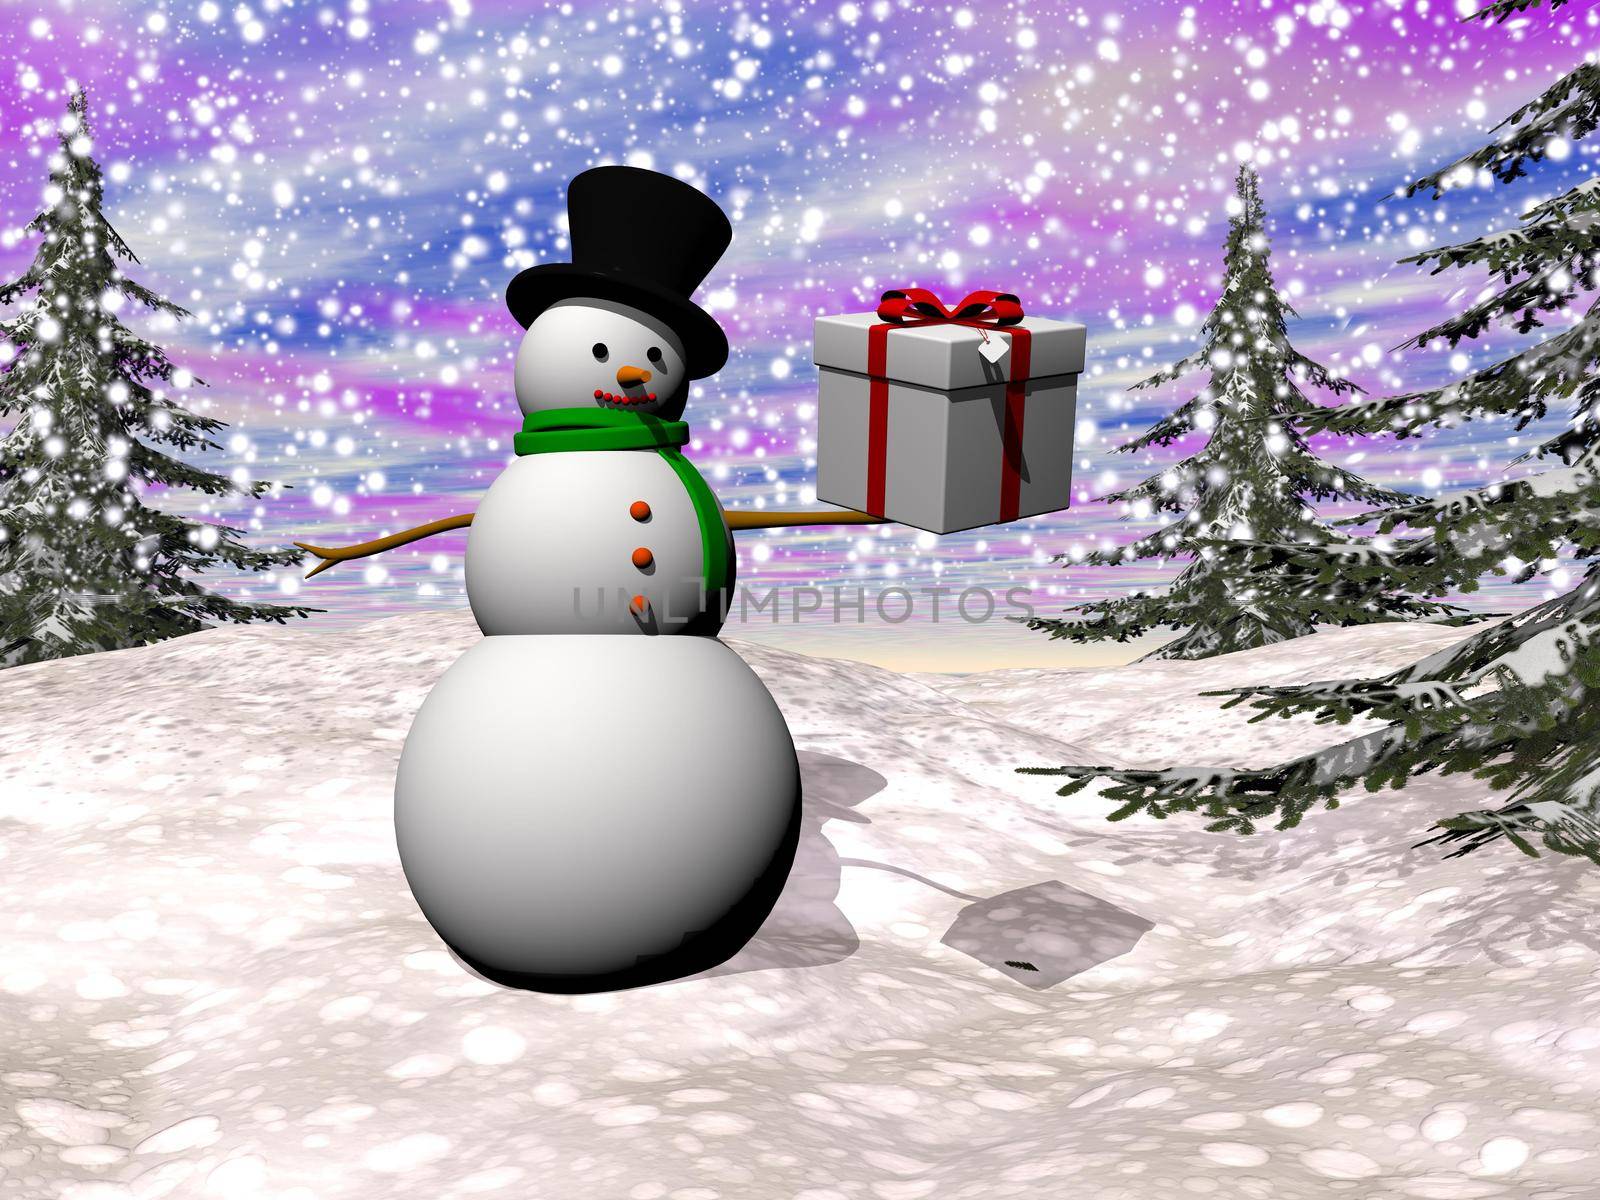 One snowman standing in winter landscape, holding a gift box with falling snow covering mountains and fir trees by beautiful sunset light